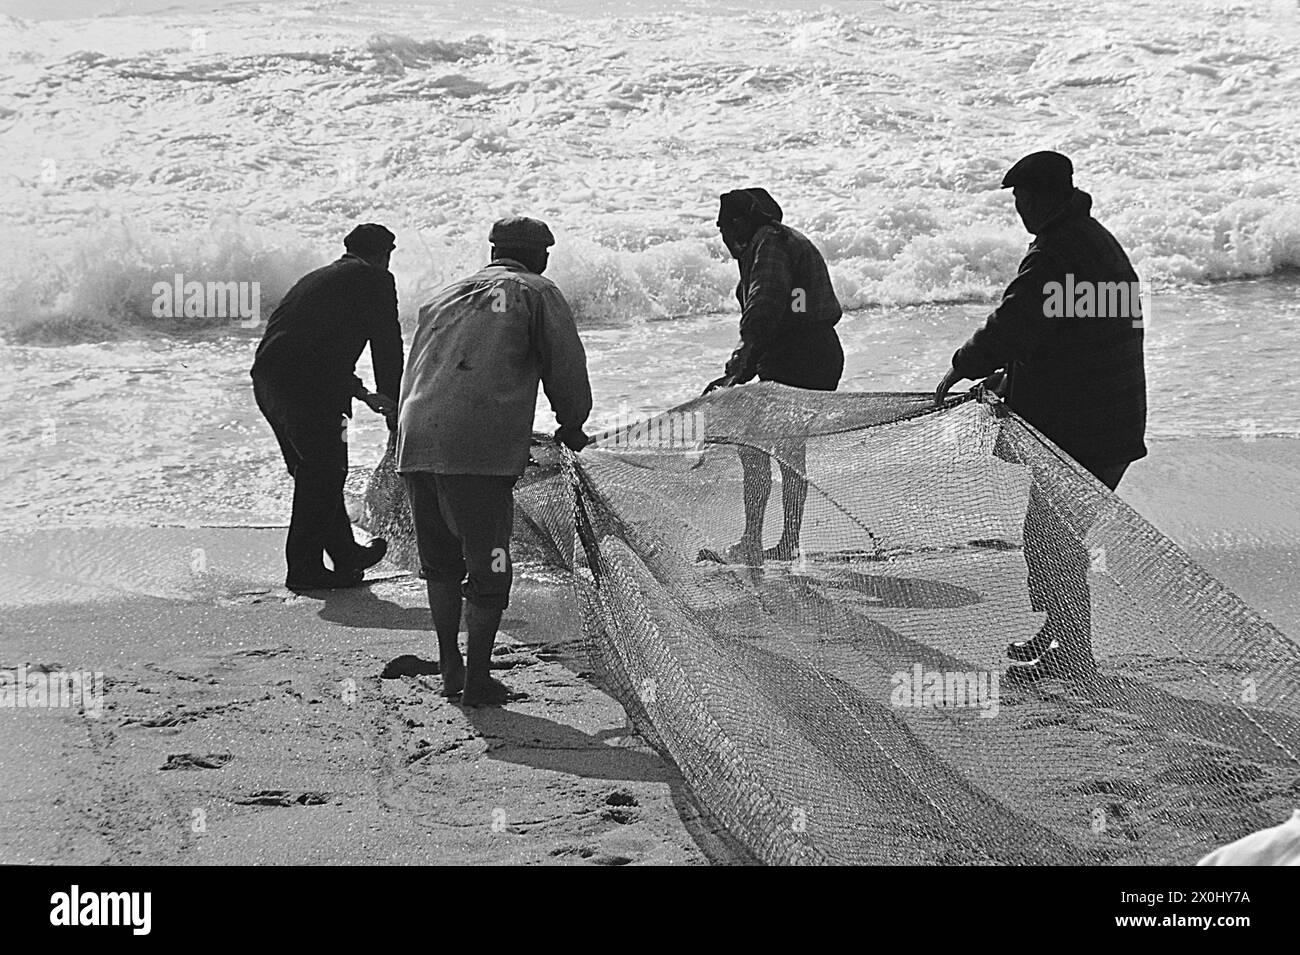 Women and men bring in trawls on the beach of Nazaré in Portugal. [automated translation] Stock Photo